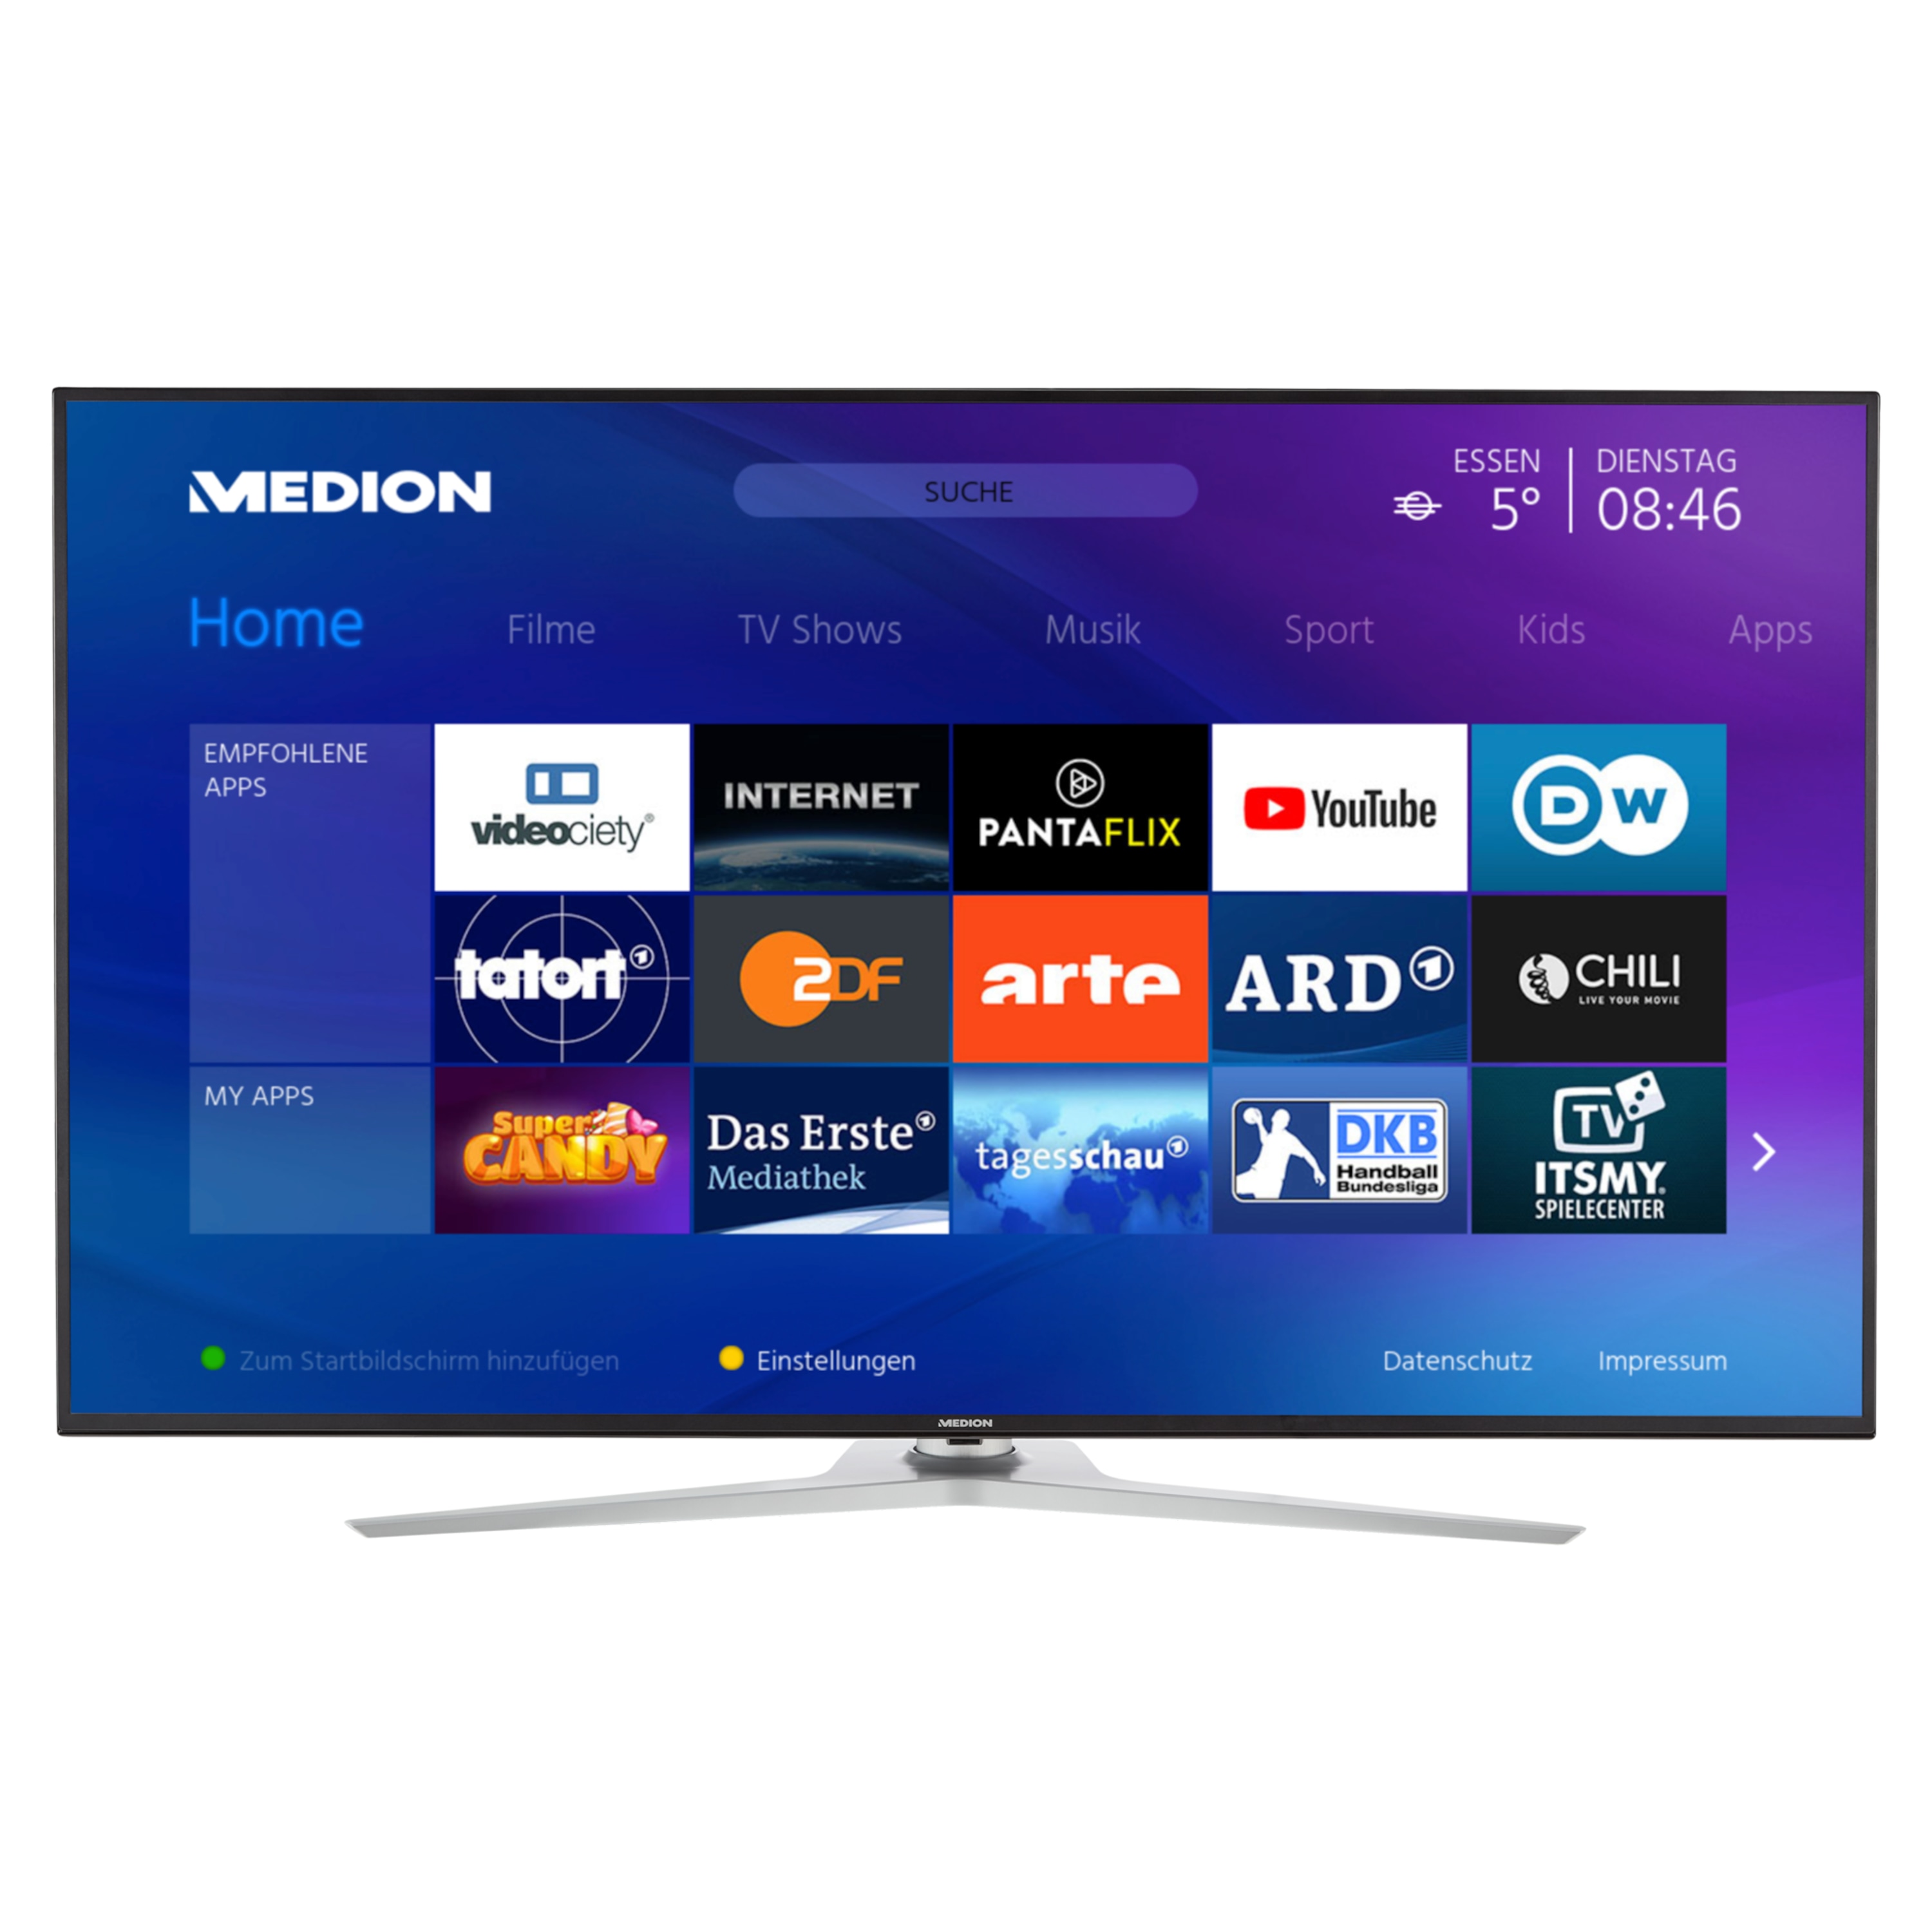 MEDION® LIFE® X16533 Smart-TV, 163,9 cm (65'') Ultra HD Display, HDR, Dolby Vision™, Micro Dimming, MEMC, WCG, PVR ready, Netflix, Amazon Prime Video, Bluetooth®, DTS HD, integrierter Subwoofer, HD Triple Tuner, CI+